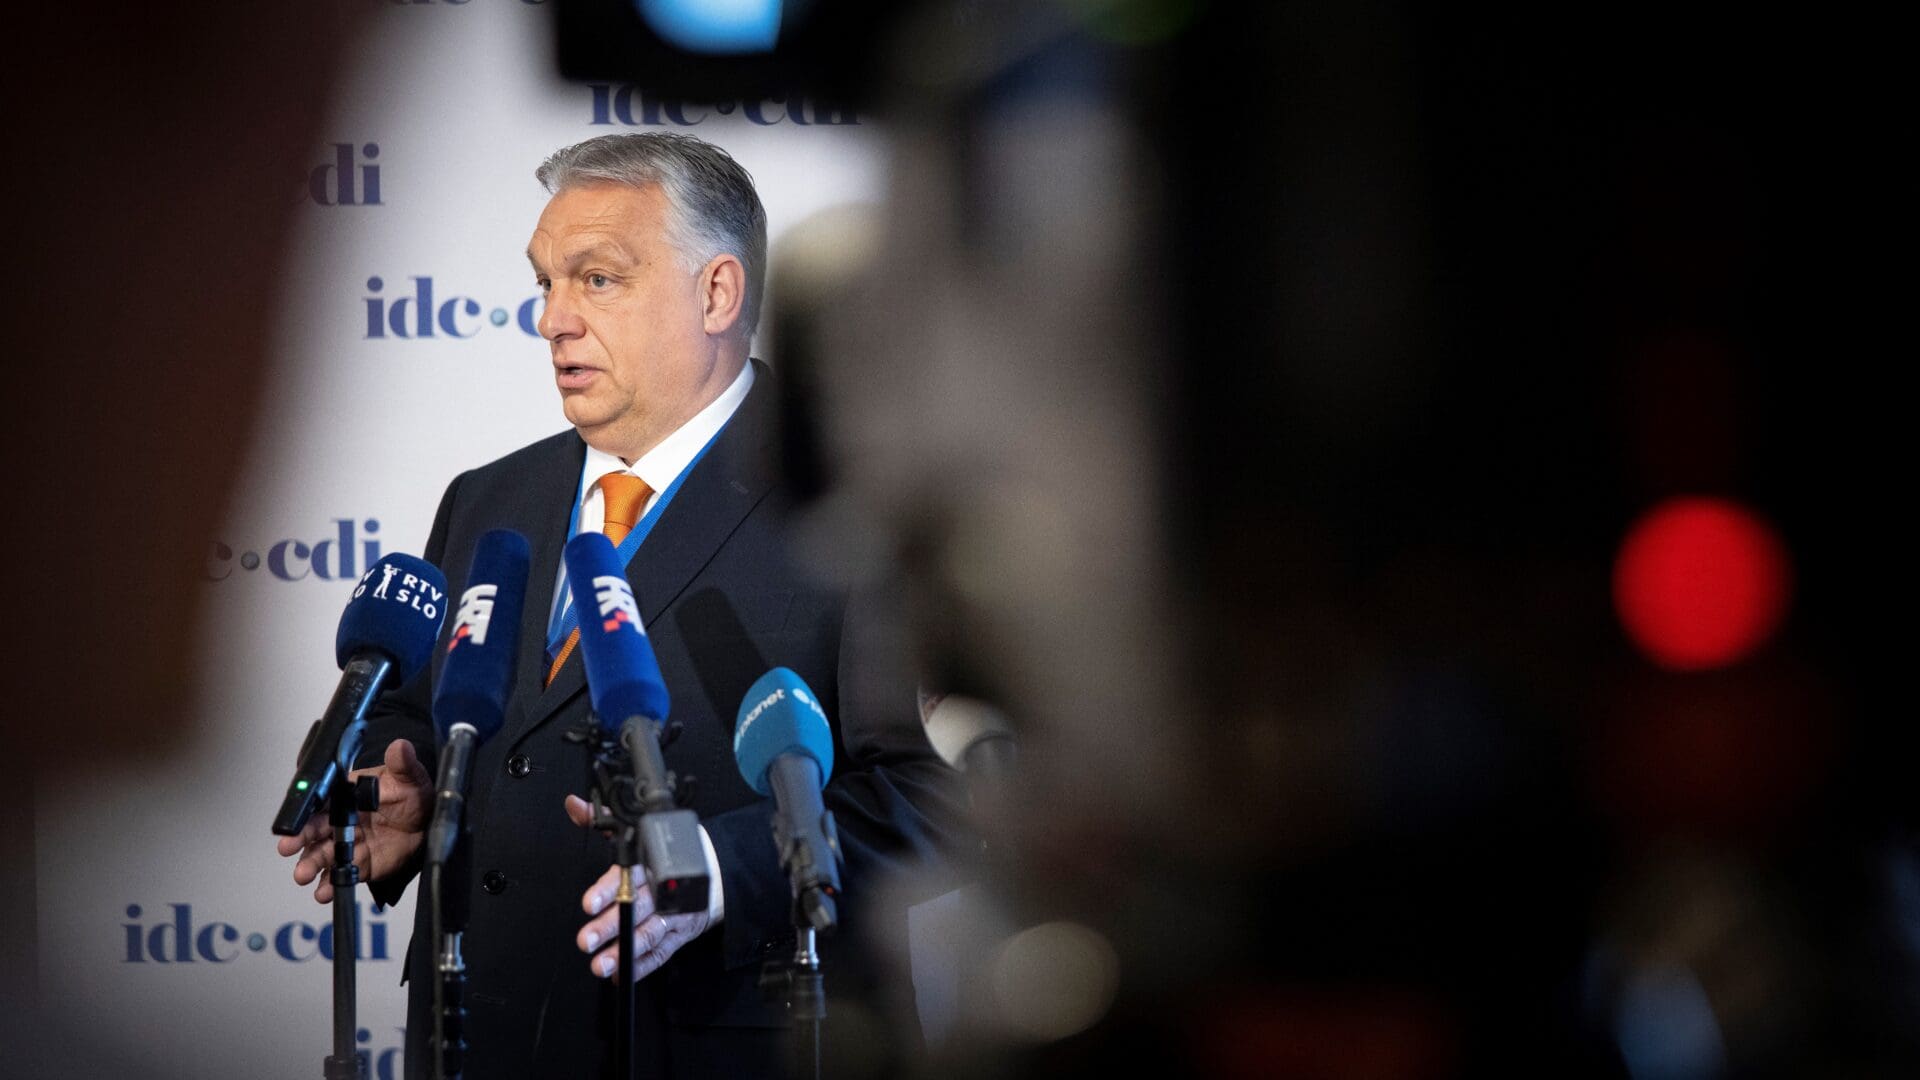 Viktor Orbán speaking at the leadership meeting of CDI in Bled, Slovenia on 18 May 2023.